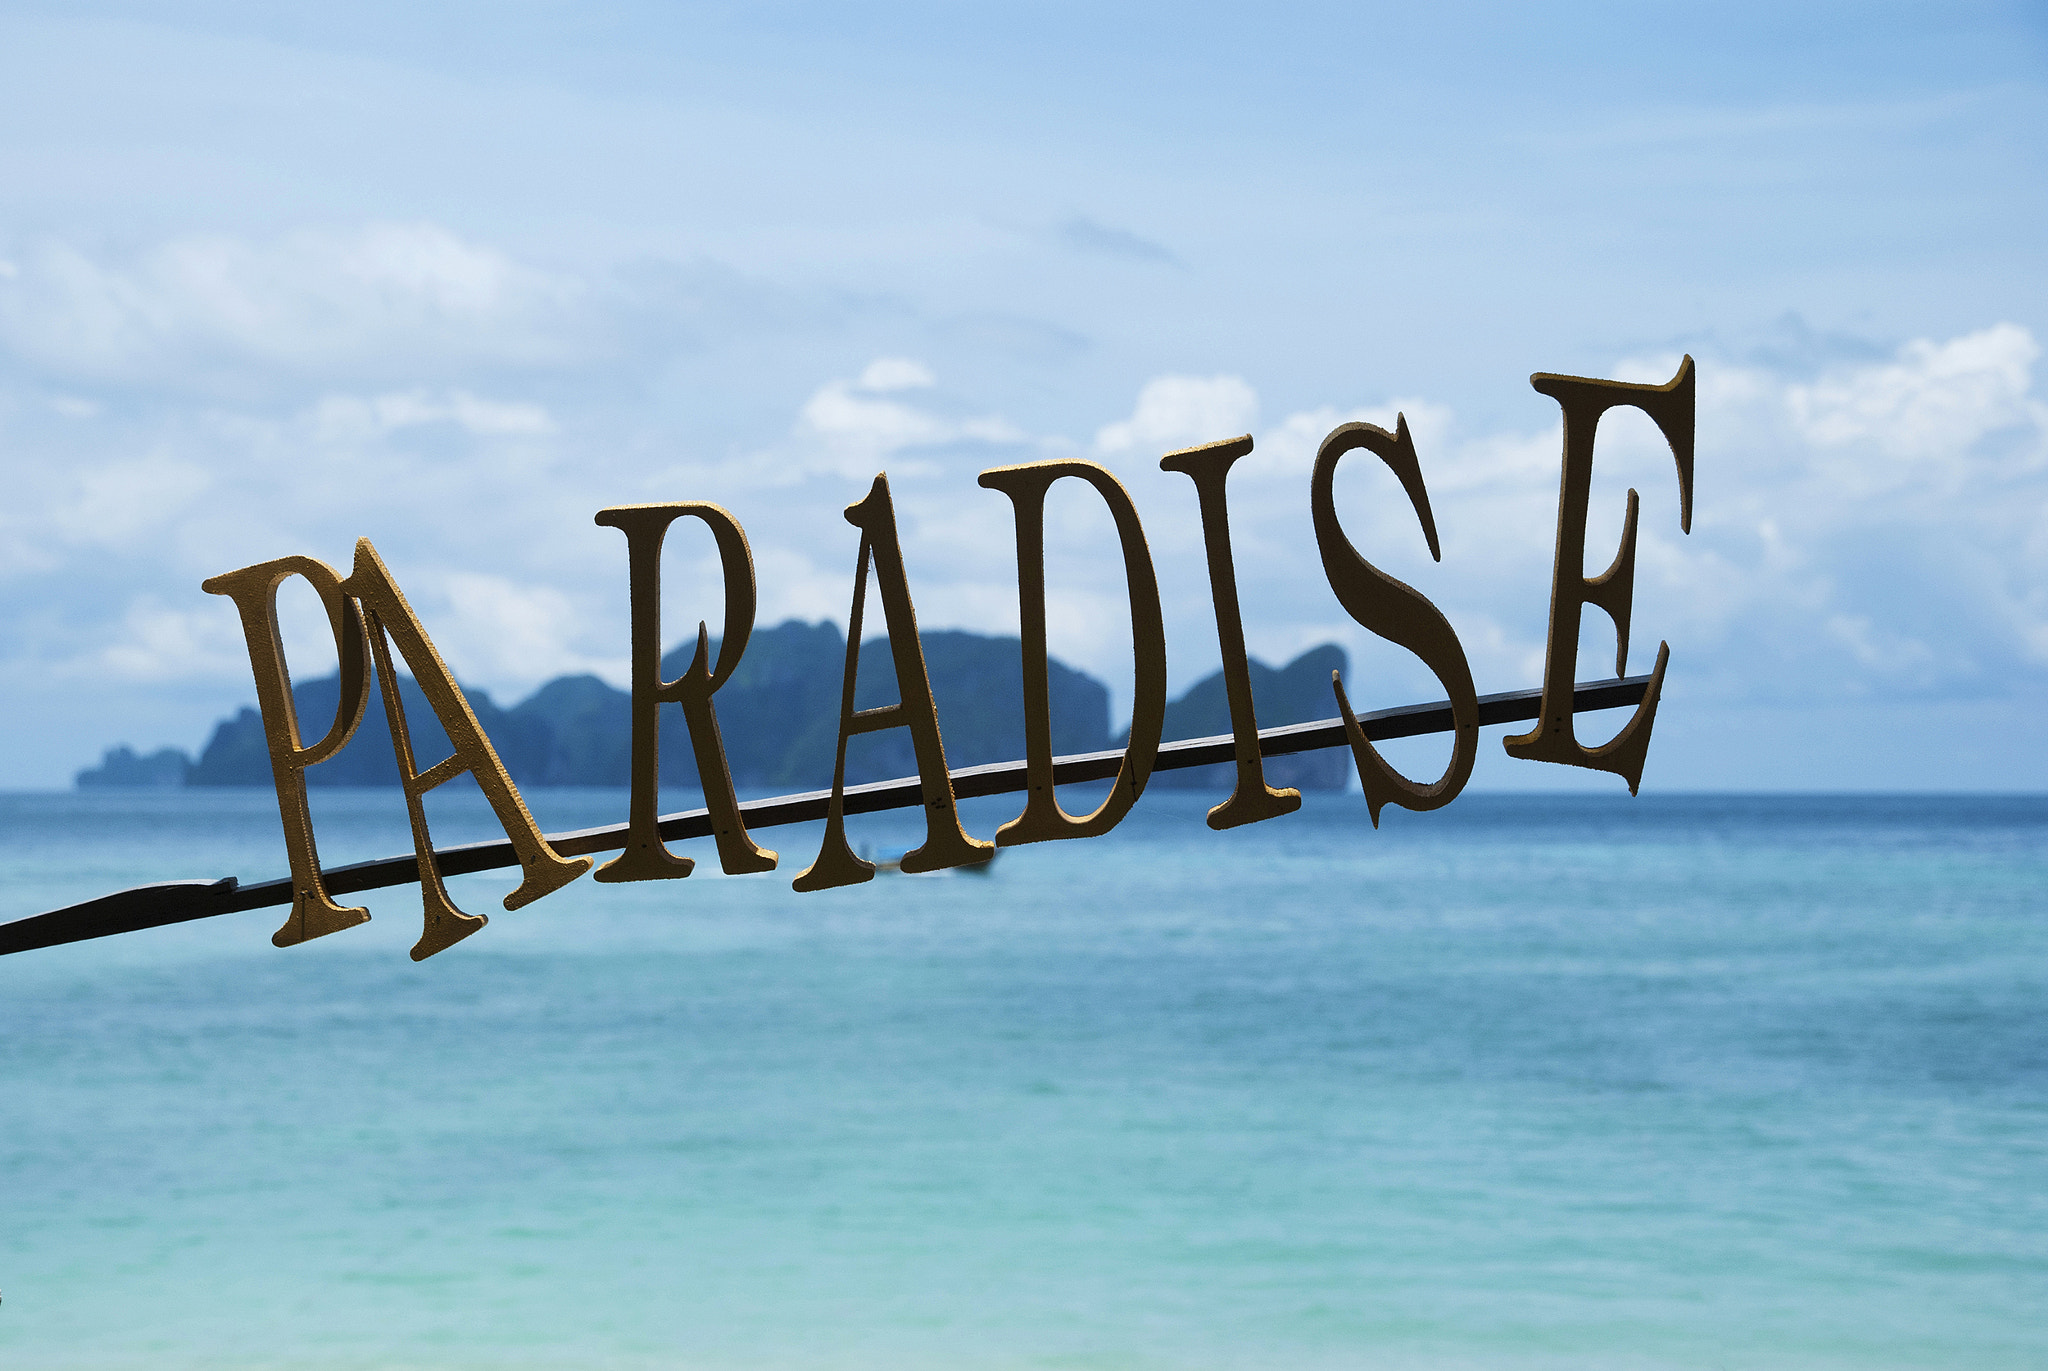 Nikon D80 sample photo. Paradise sign with a sea and islands on background photography